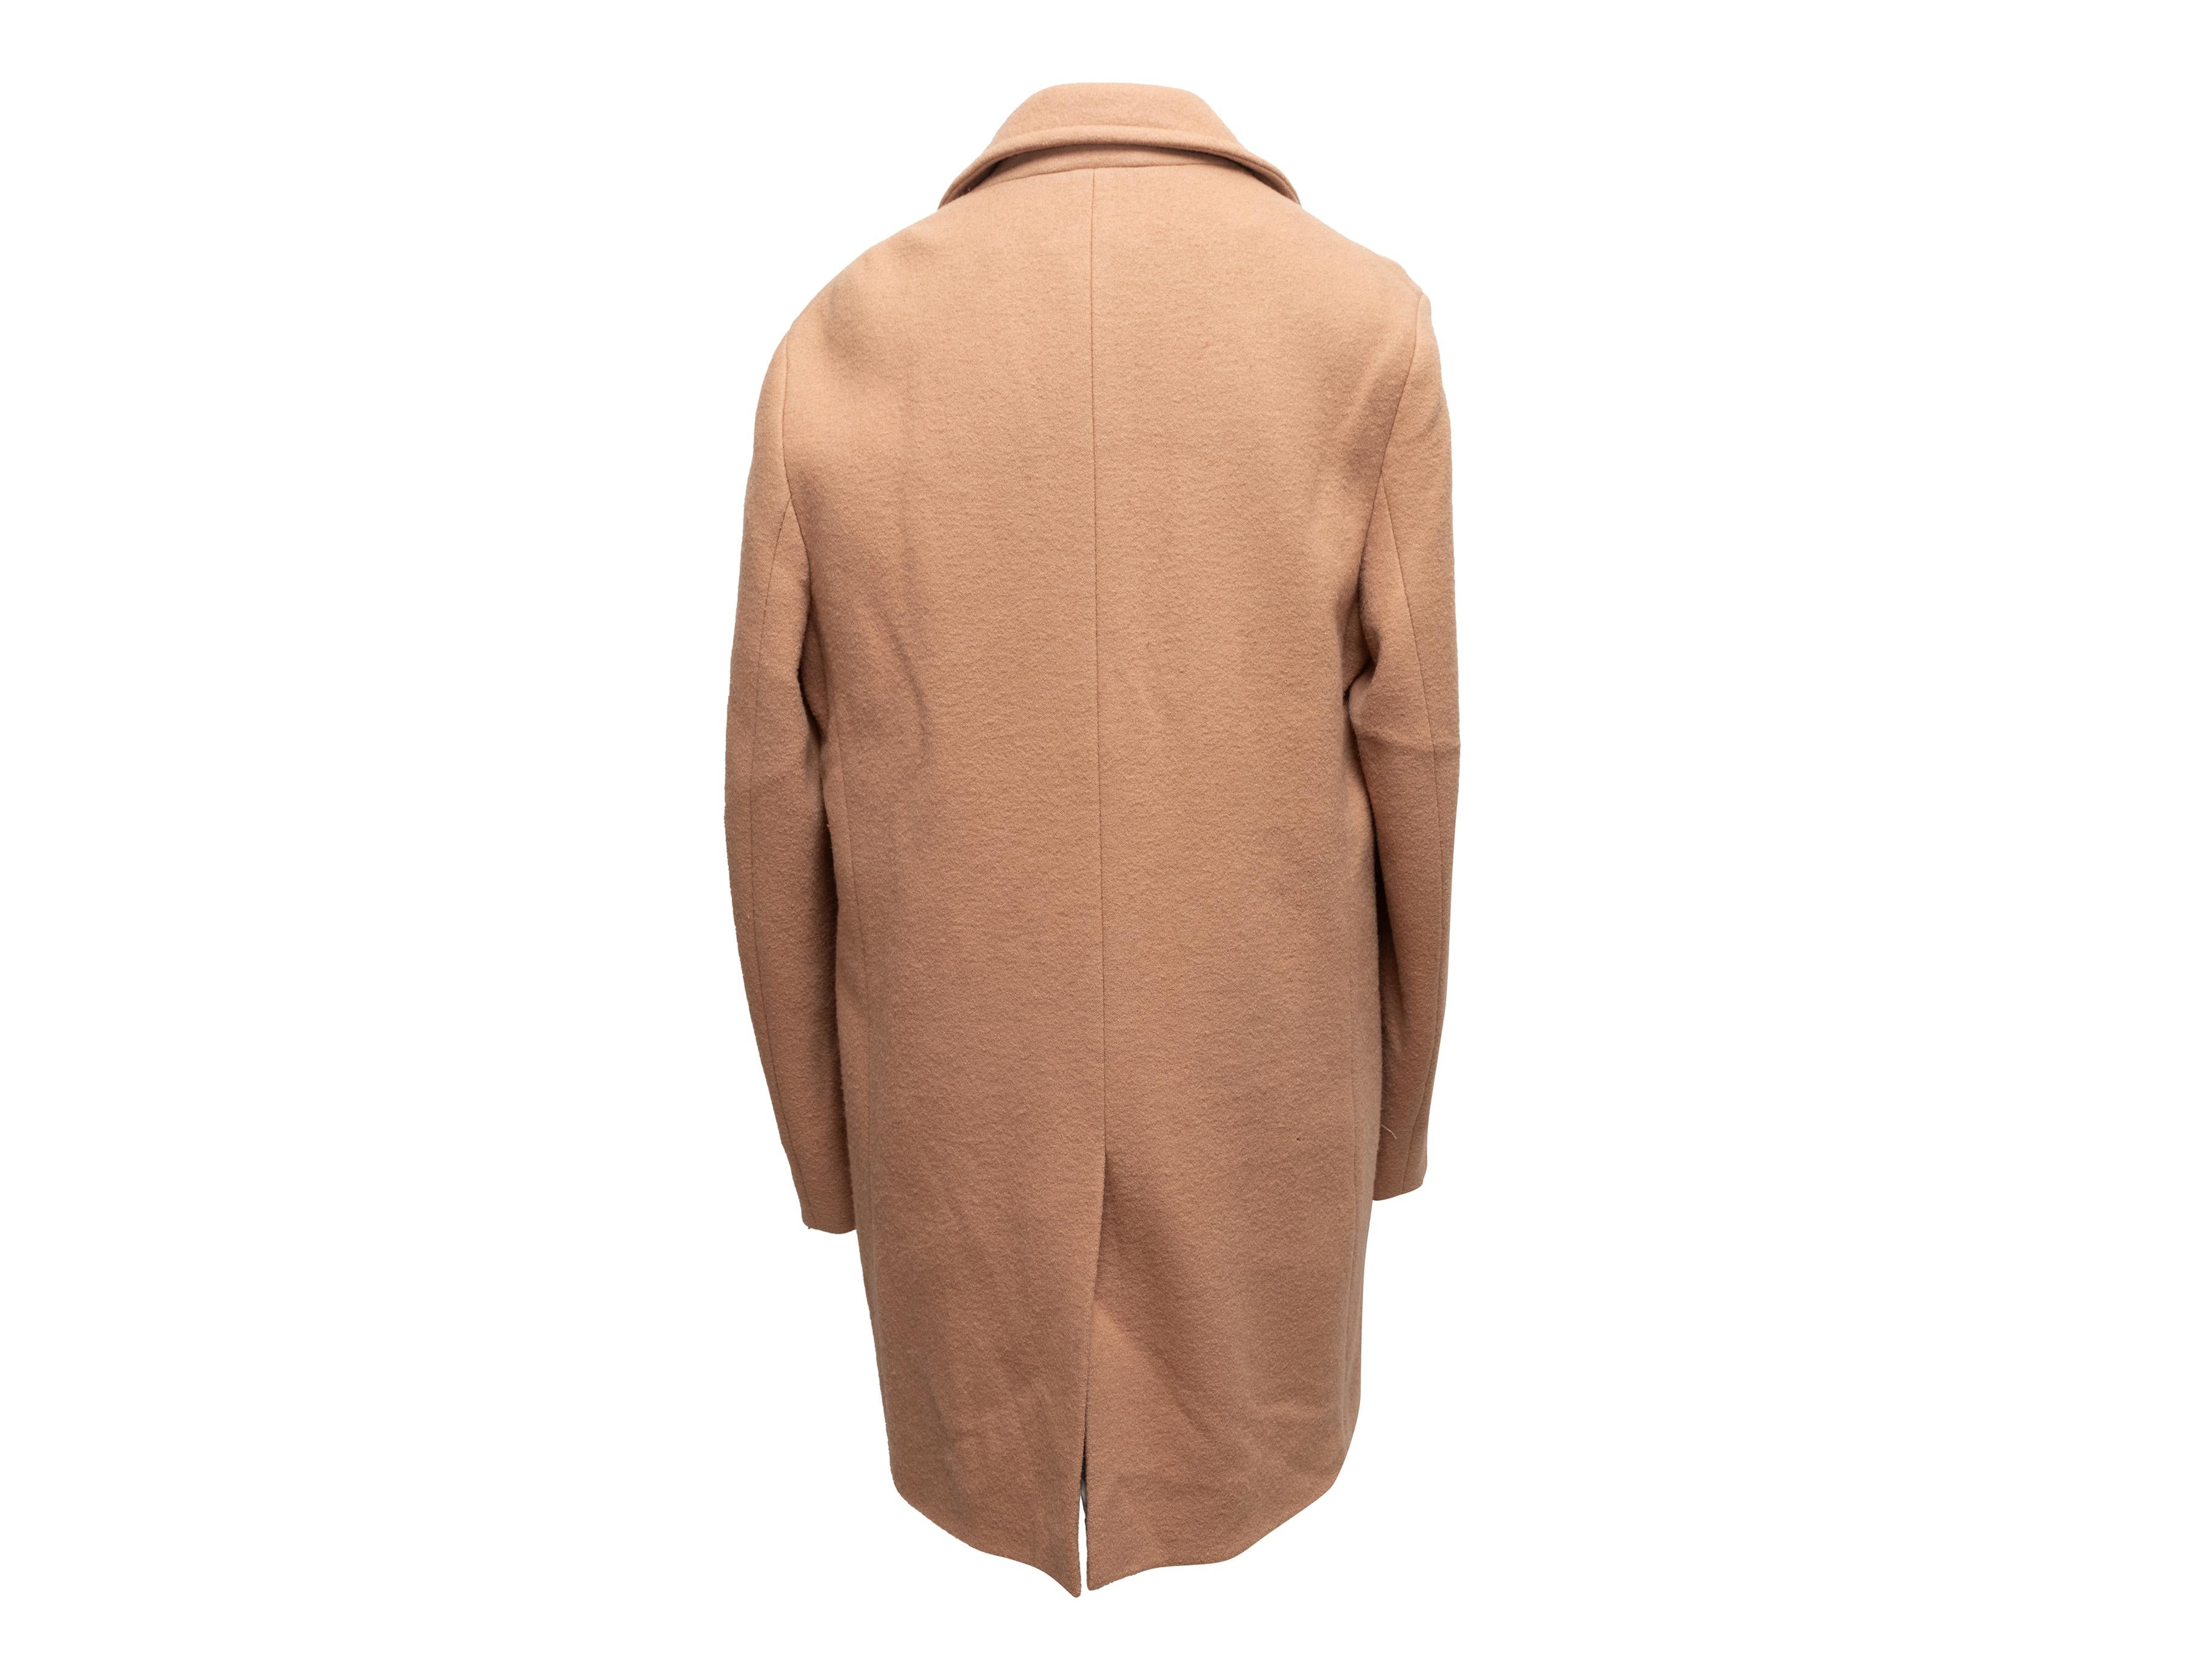 Tan Phillip Lim Wool Double-Breasted Fur-Lined Coat In Good Condition For Sale In New York, NY